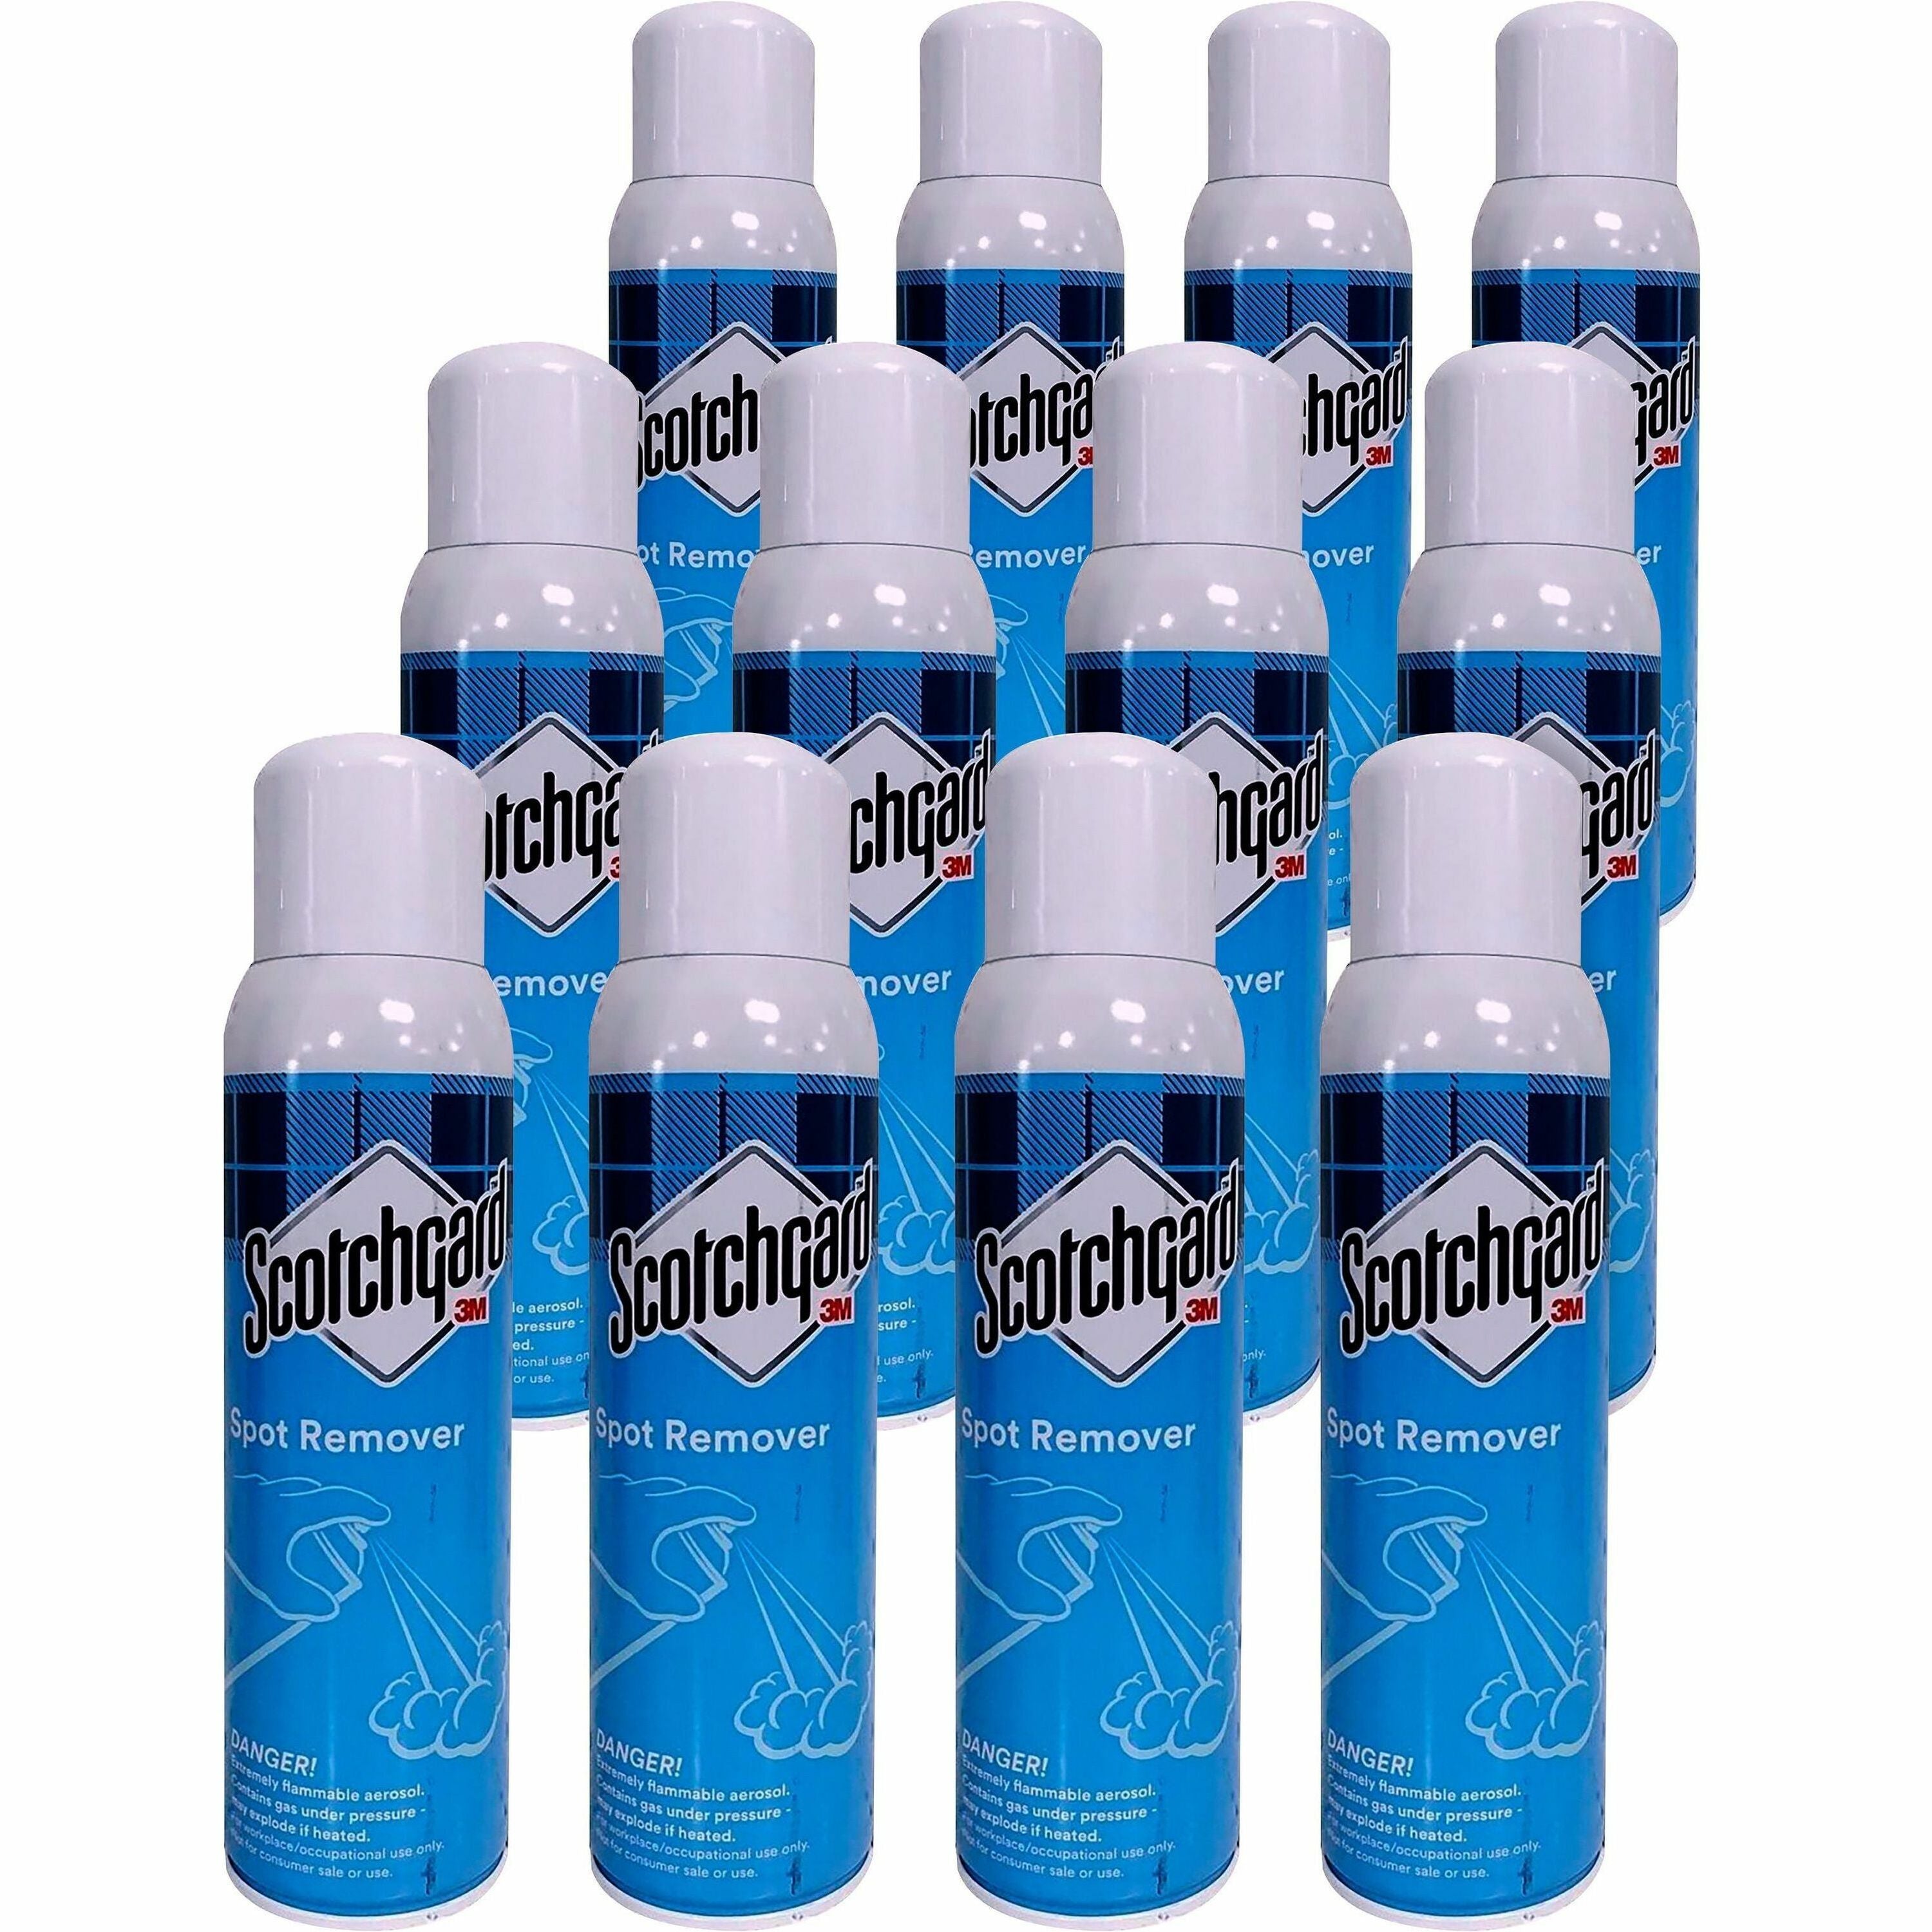 scotchgard-spot-remover-upholstery-cleaner-17-fl-oz-05-quart-12-carton-chemical-resistant-moisture-resistant-absorbent-rinse-free-non-sticky-residue-free-anti-resoiling-non-flammable-white_mmm14003ct - 1